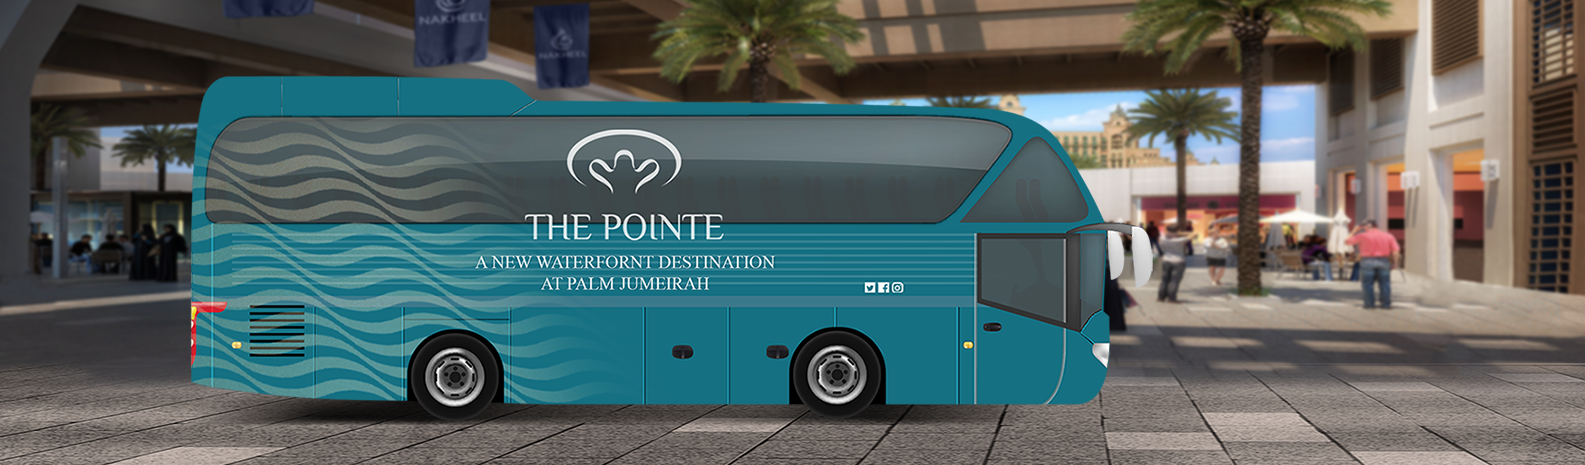 Shuttle Bus Services Near Me | The Pointe